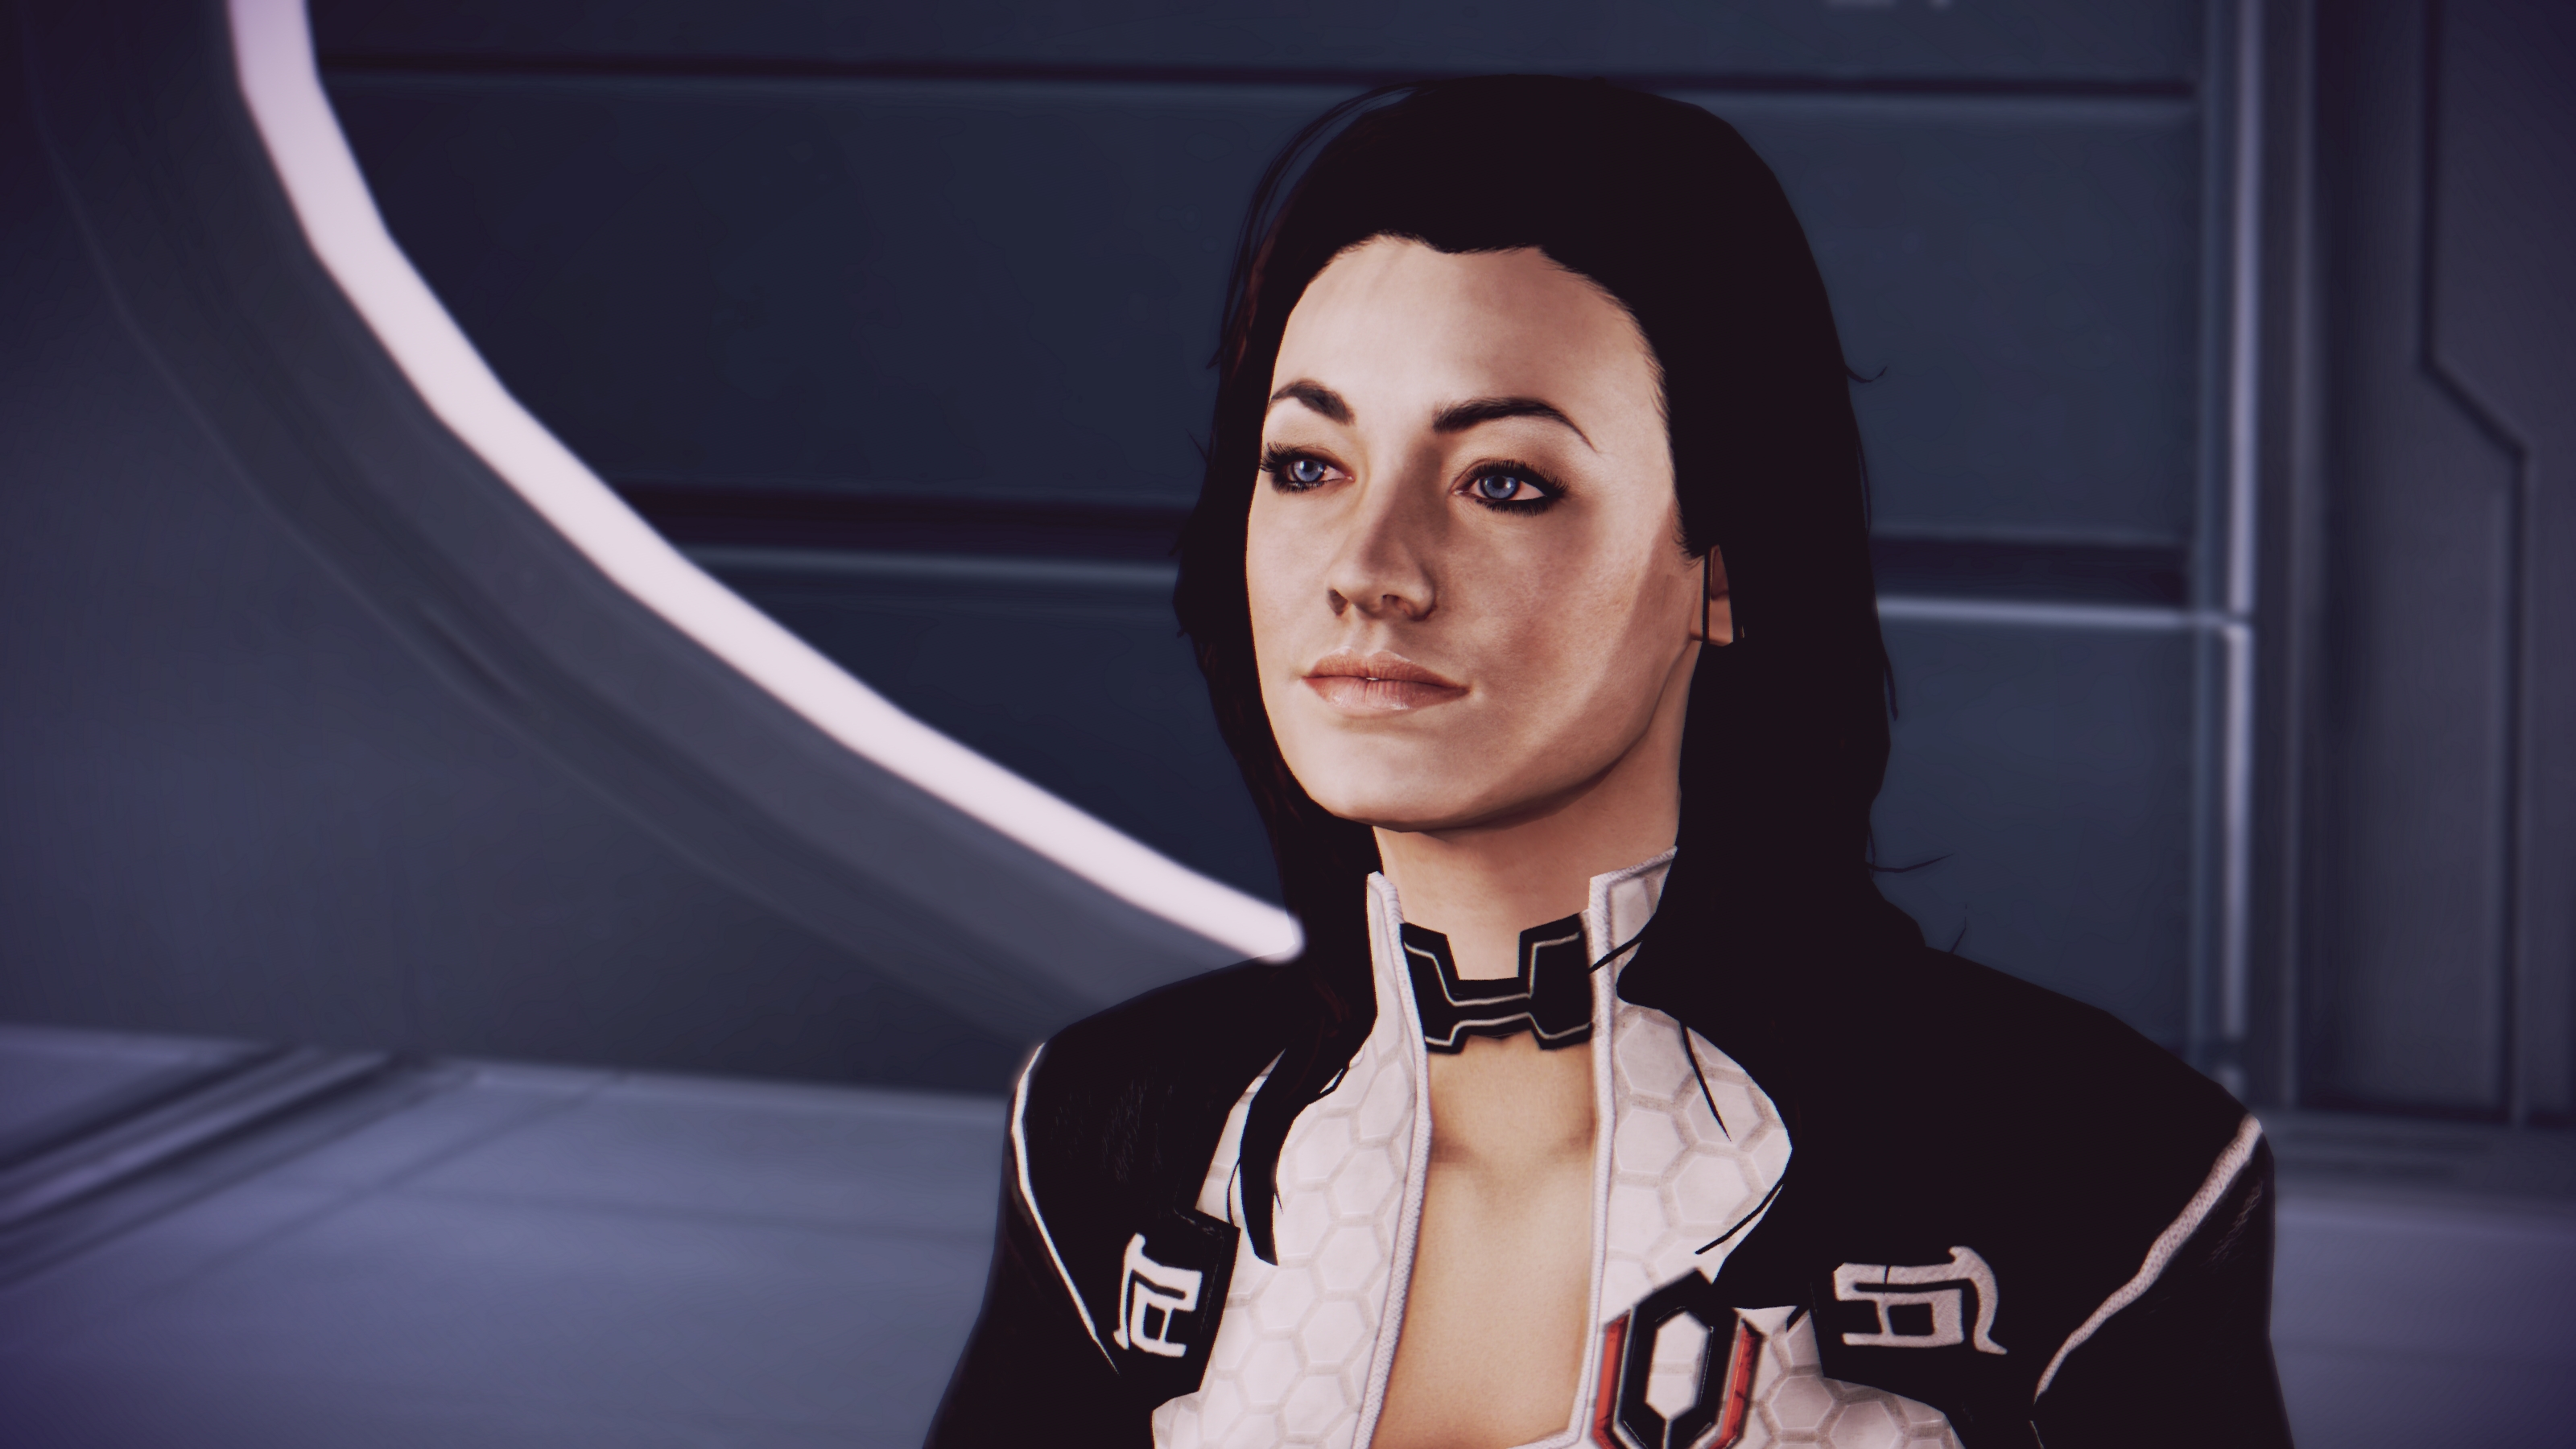 enb sweetfx mass effect 2 download